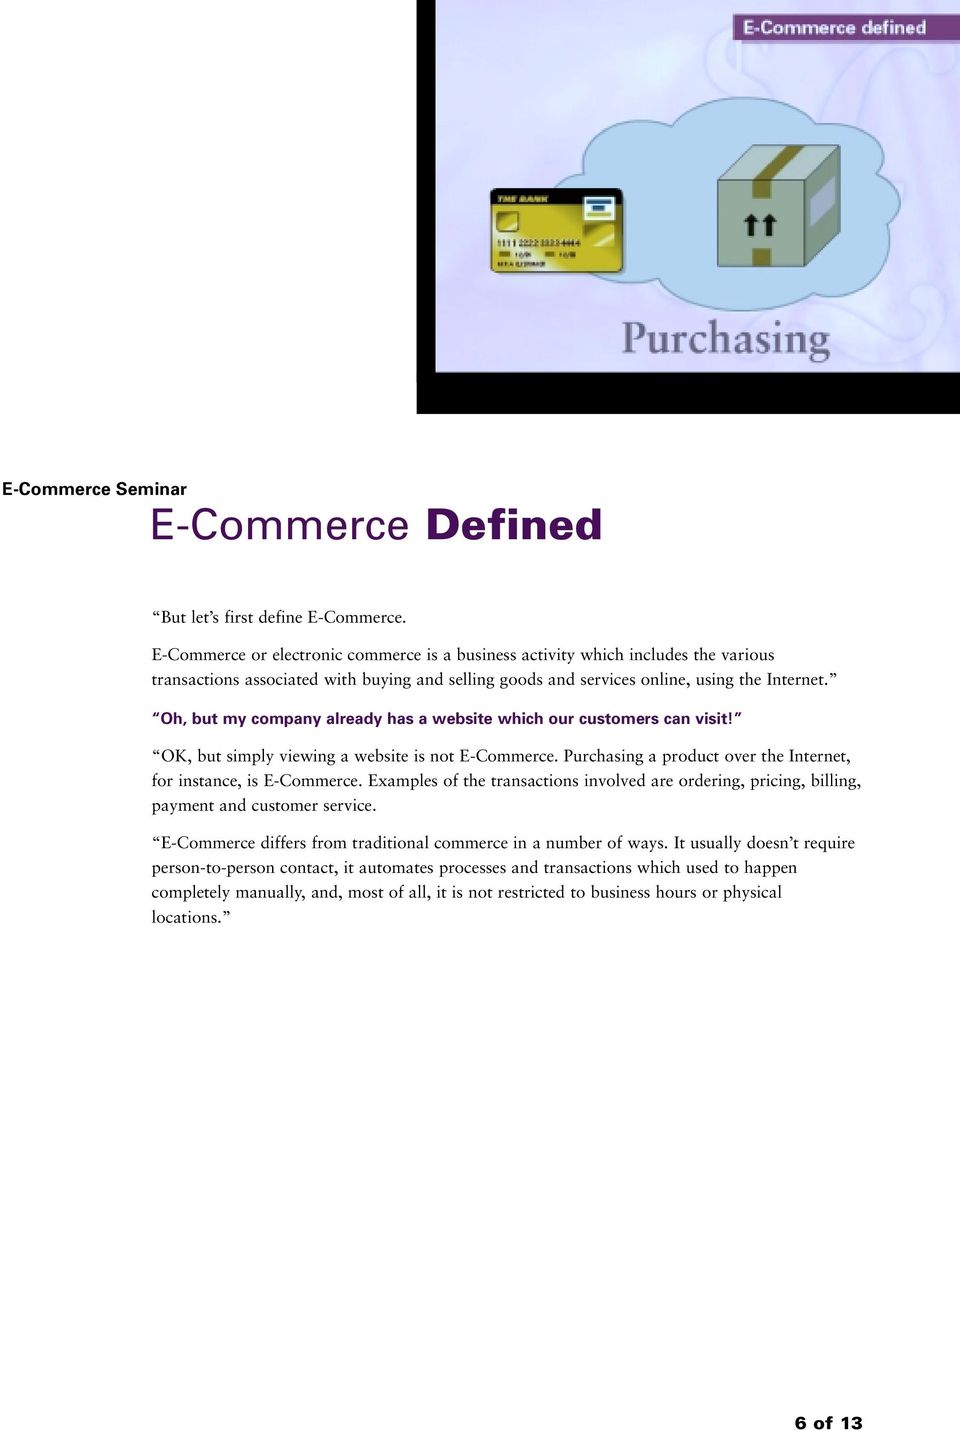 Oh, but my company already has a website which our customers can visit! OK, but simply viewing a website is not E-Commerce. Purchasing a product over the Internet, for instance, is E-Commerce.